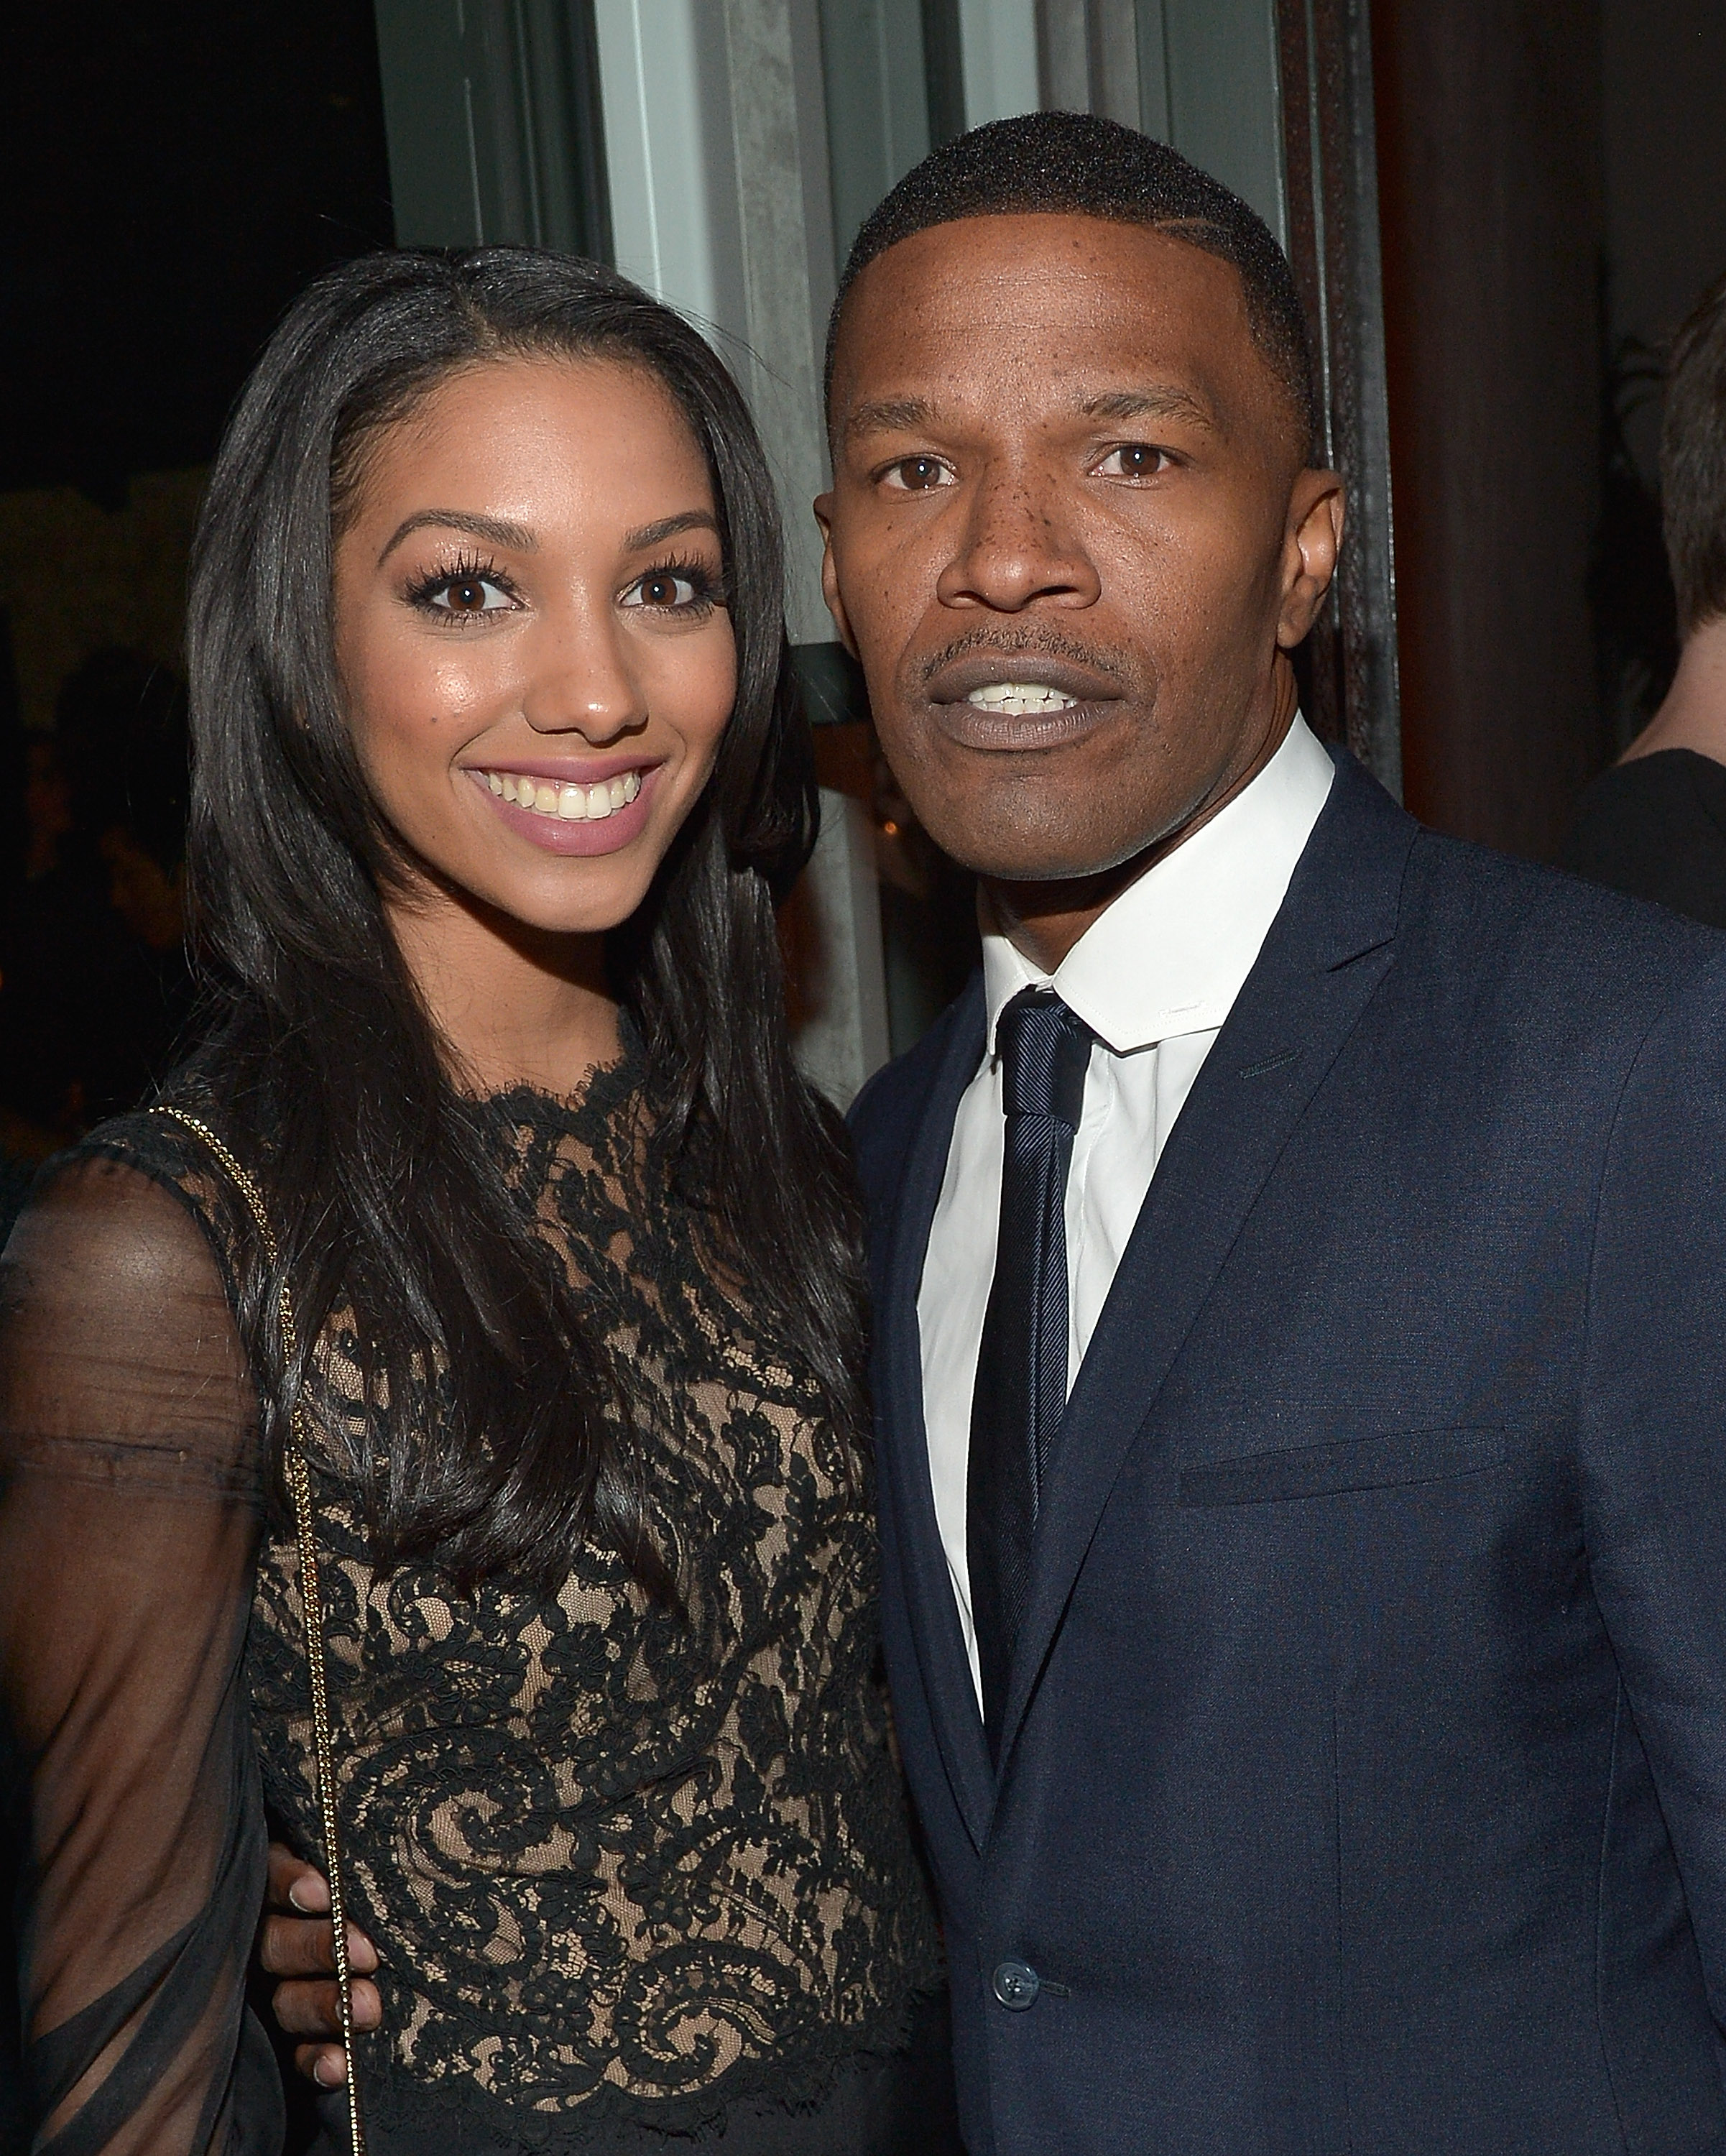 Jamie Foxx and his daughter Corinne Foxx in Los Angeles in 2015 | Source: Getty Images